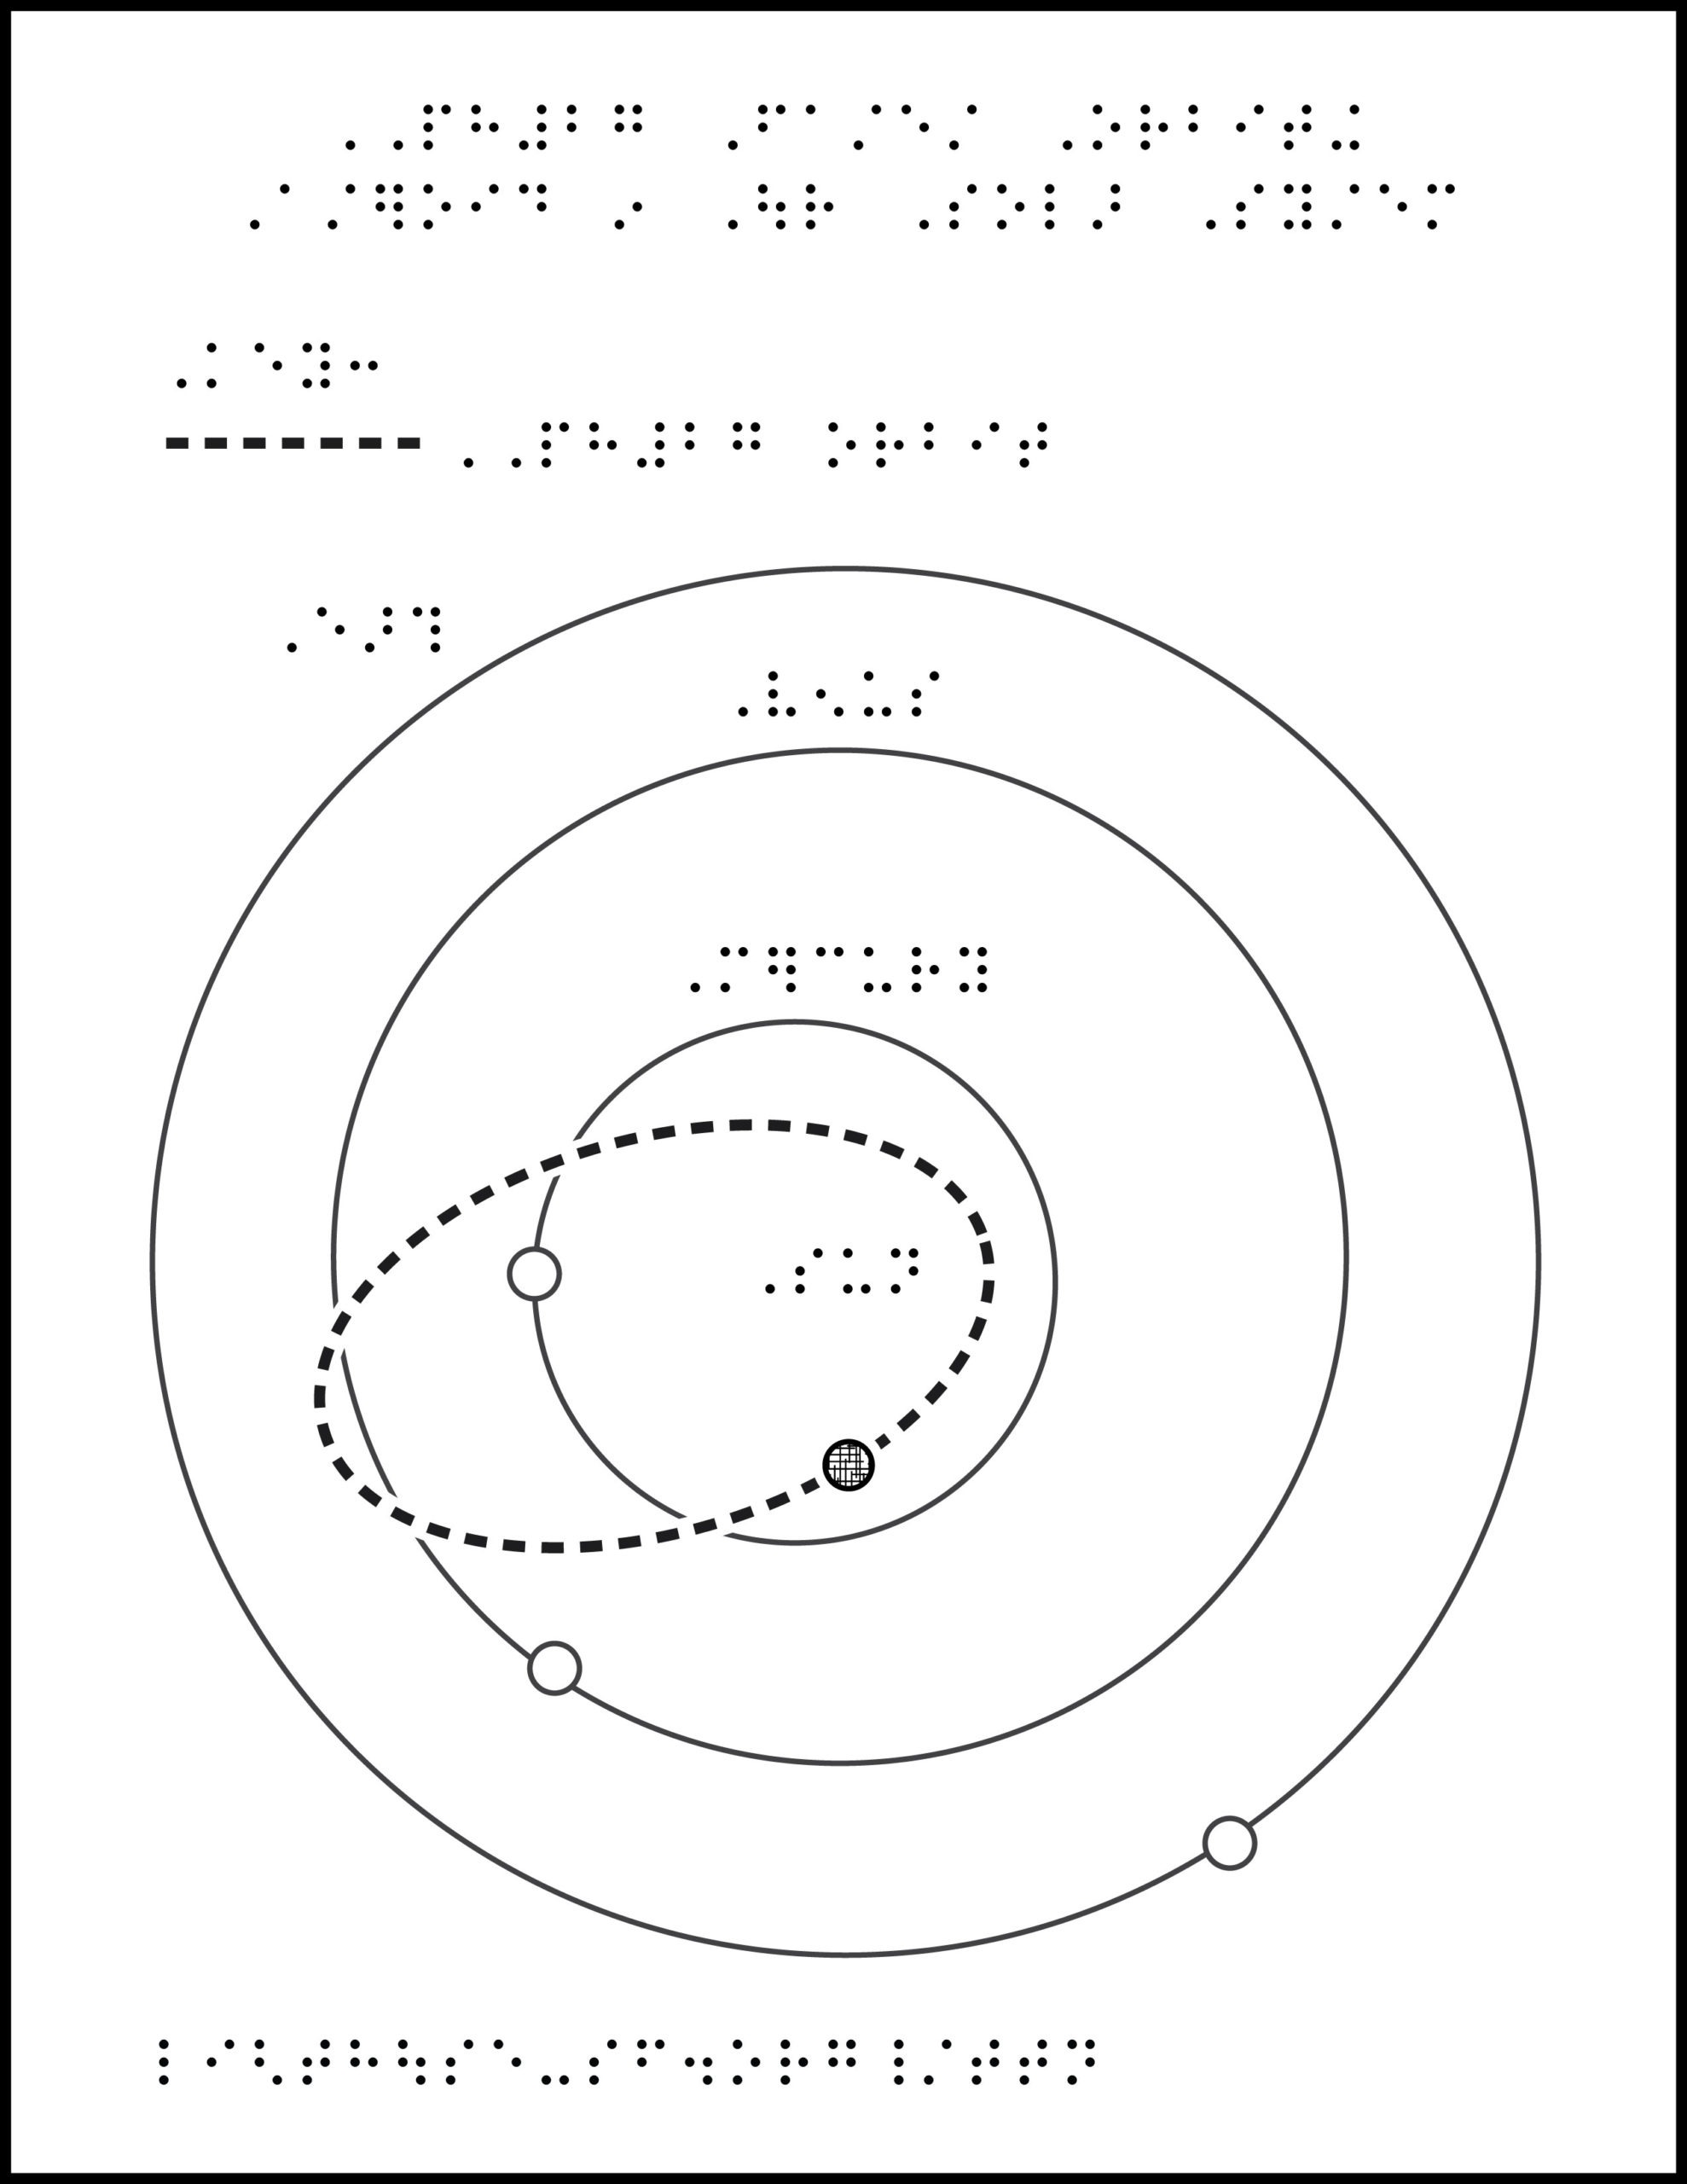 Diagram of planetary and asteroid orbits with braille labels.